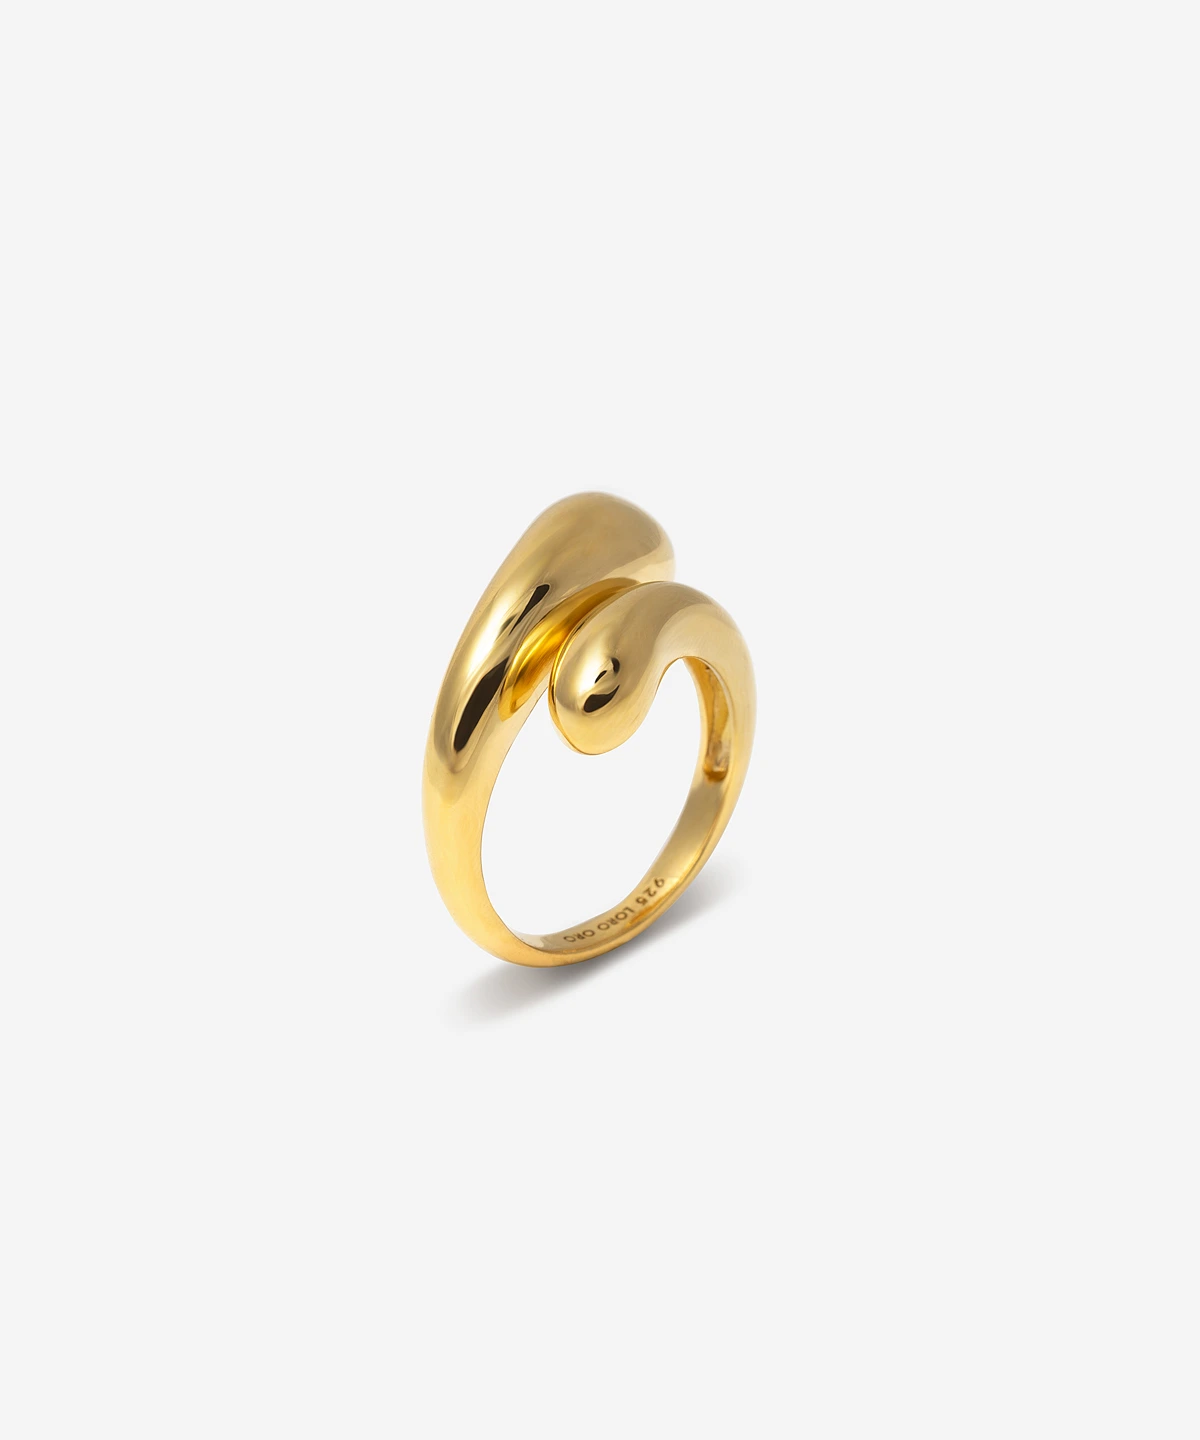 Leveche ring golden-plated